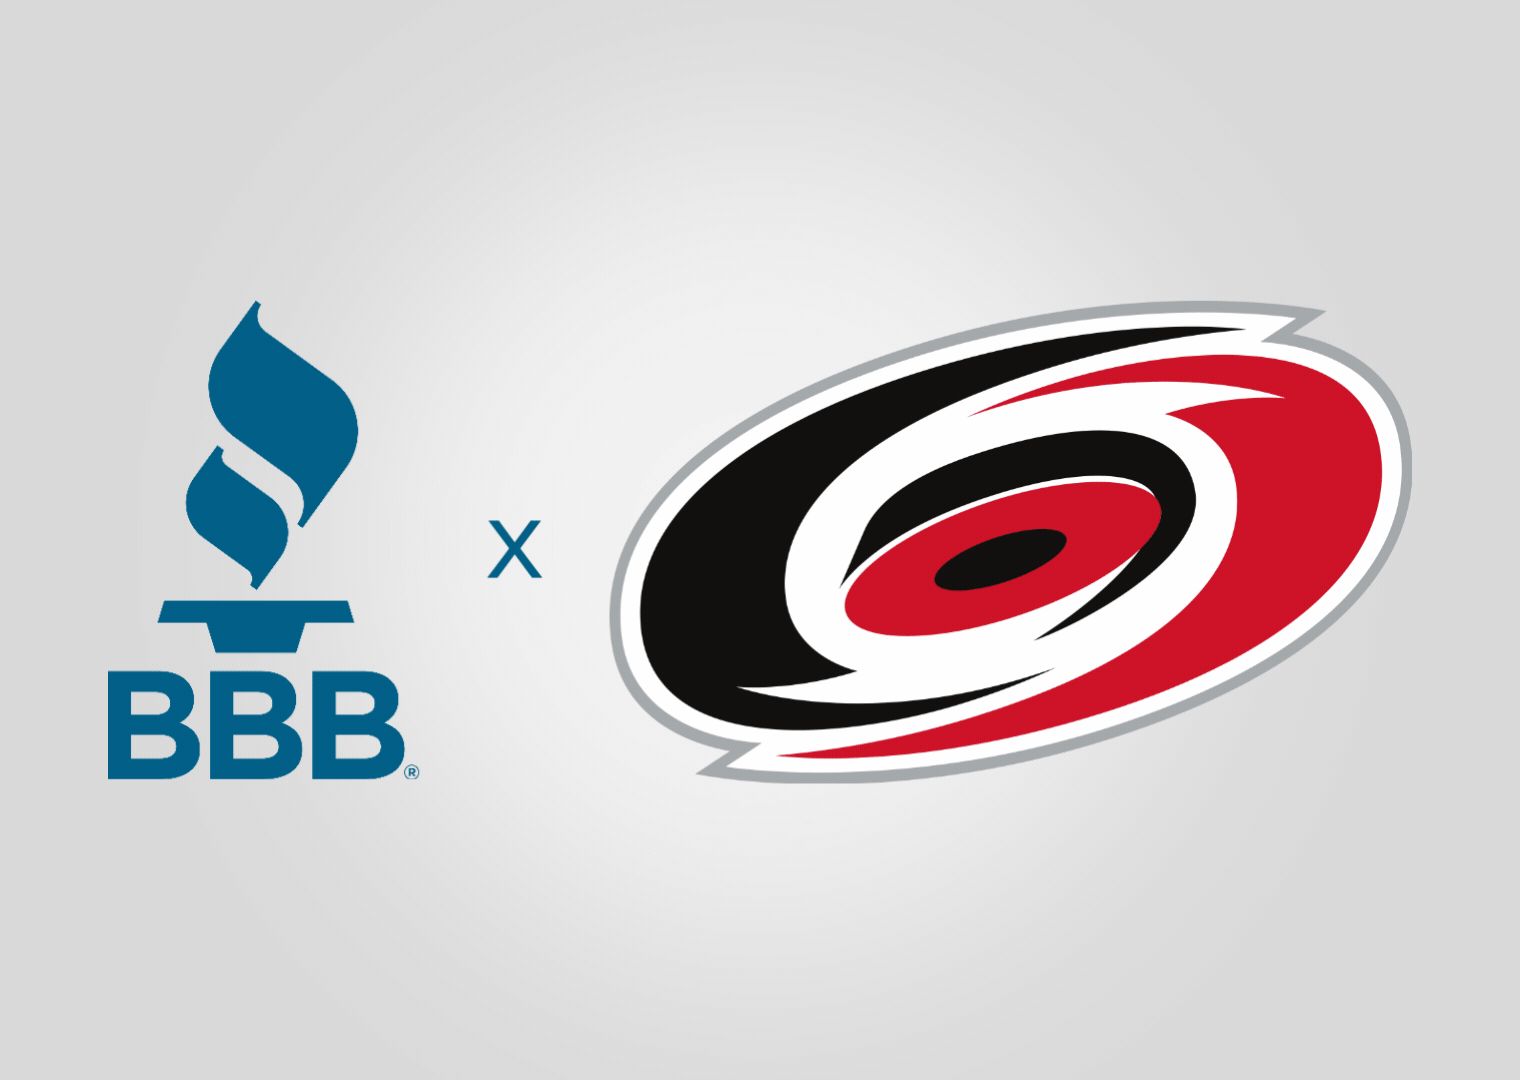 BBB logo next to the logos of our various partners